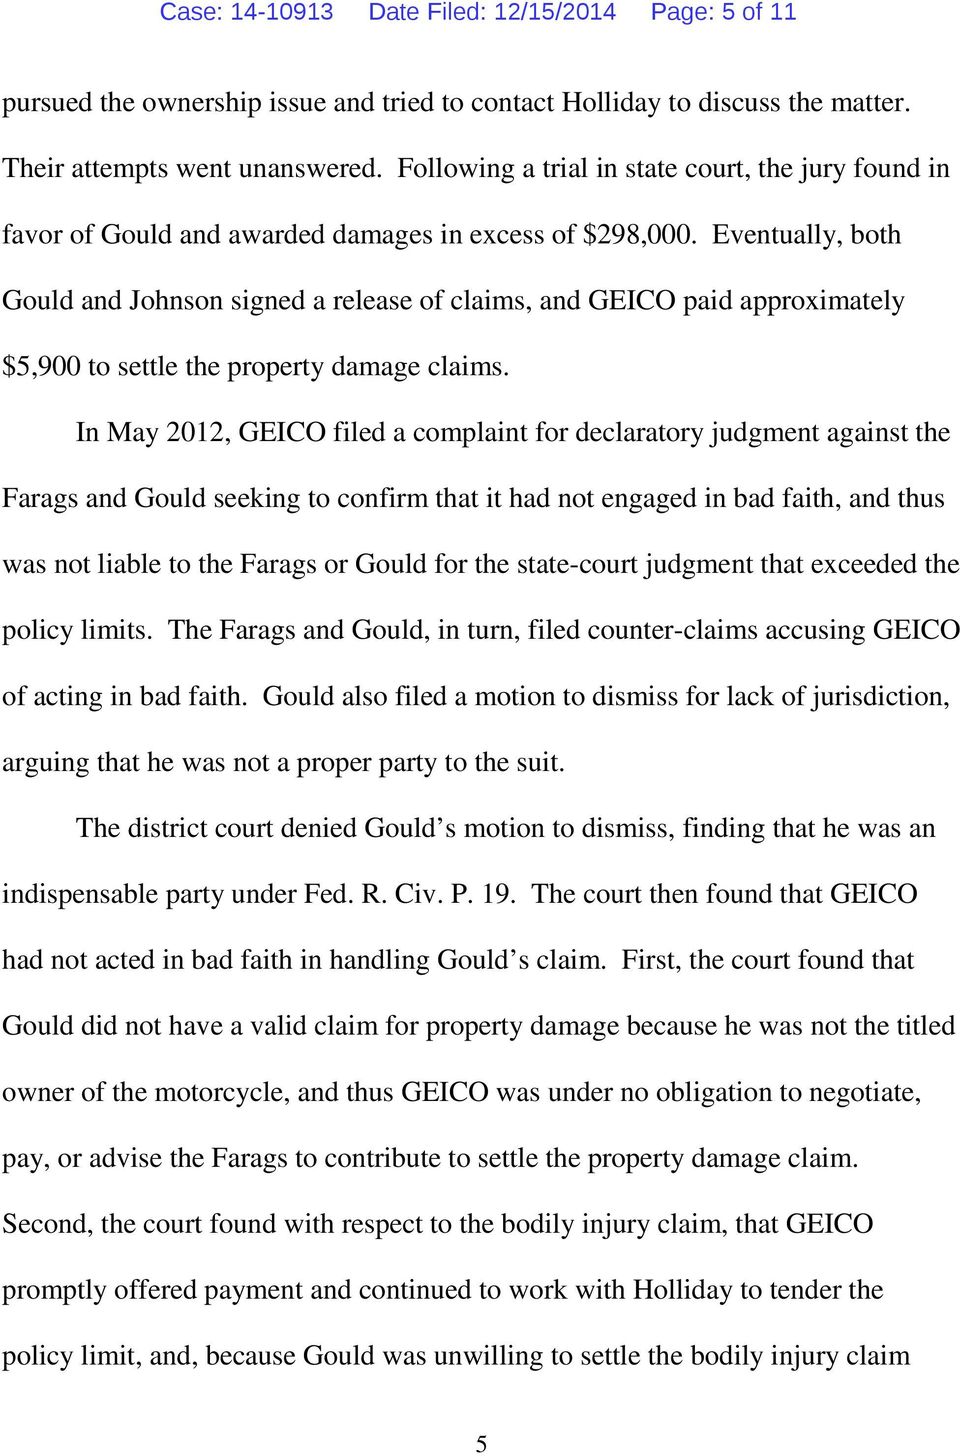 Eventually, both Gould and Johnson signed a release of claims, and GEICO paid approximately $5,900 to settle the property damage claims.